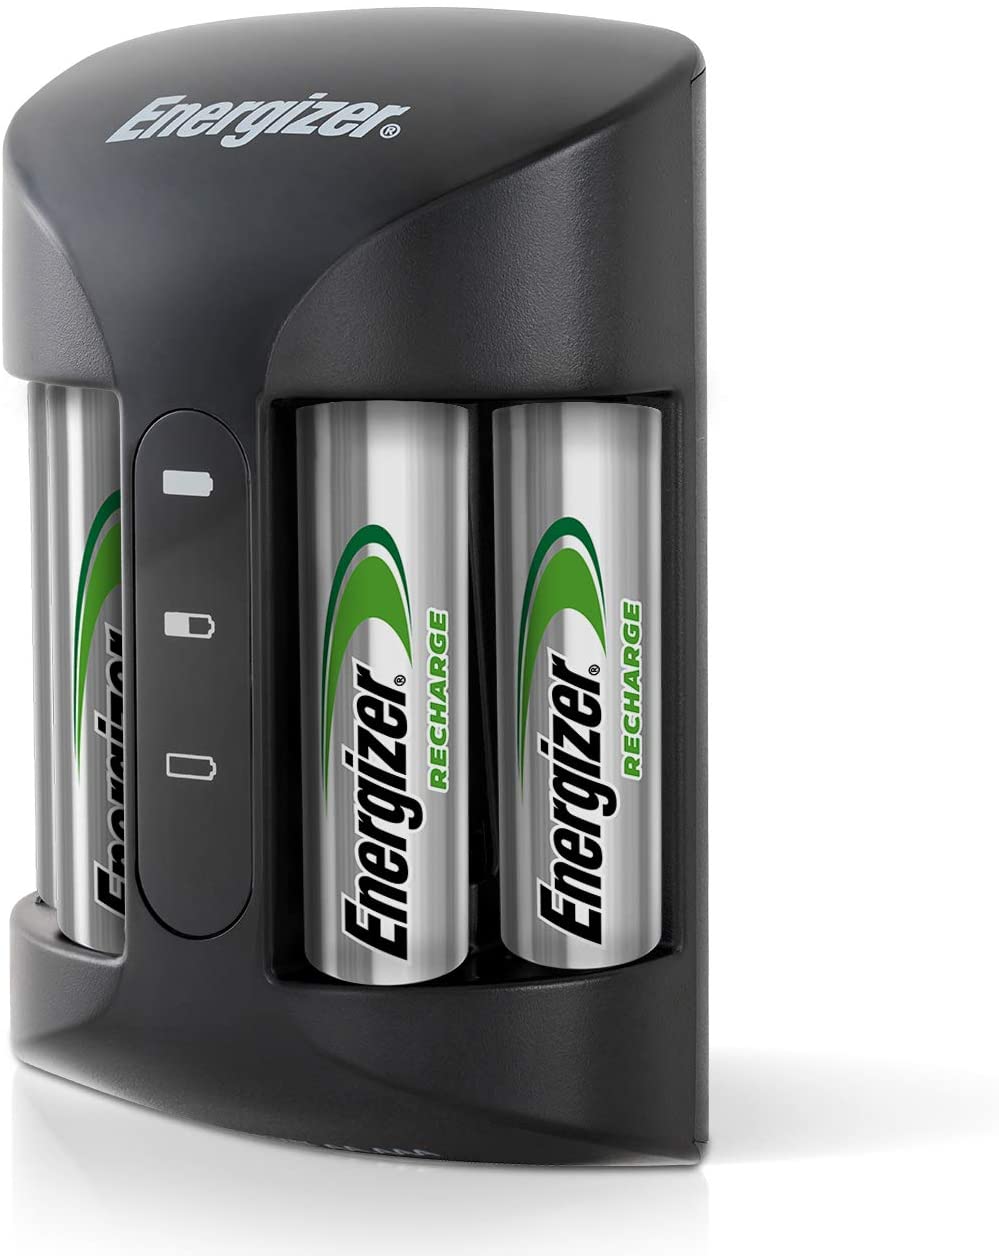 Pebish område trompet Energizer Universal AA & AAA Battery Charger - Electric Socks